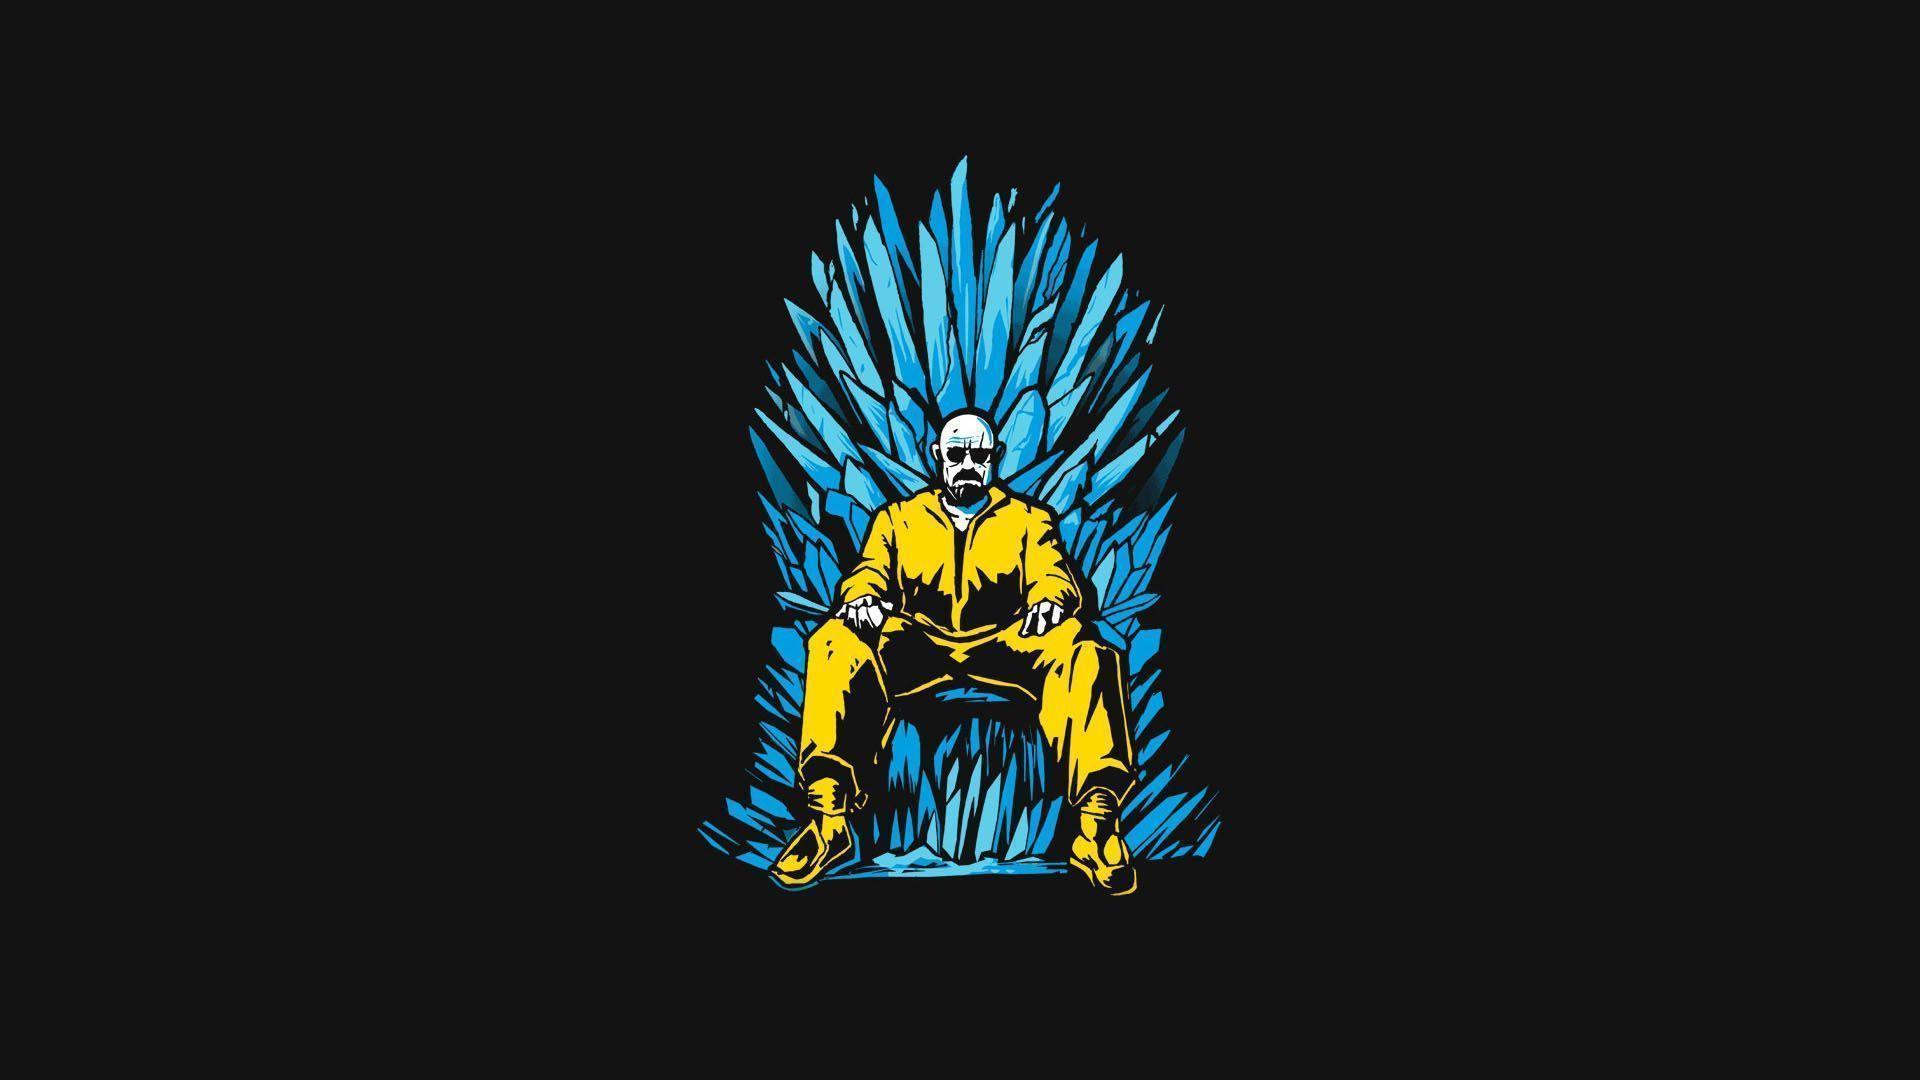 Breaking Bad Game Of Thrones Crossover HD Wallpaper 1920x1080